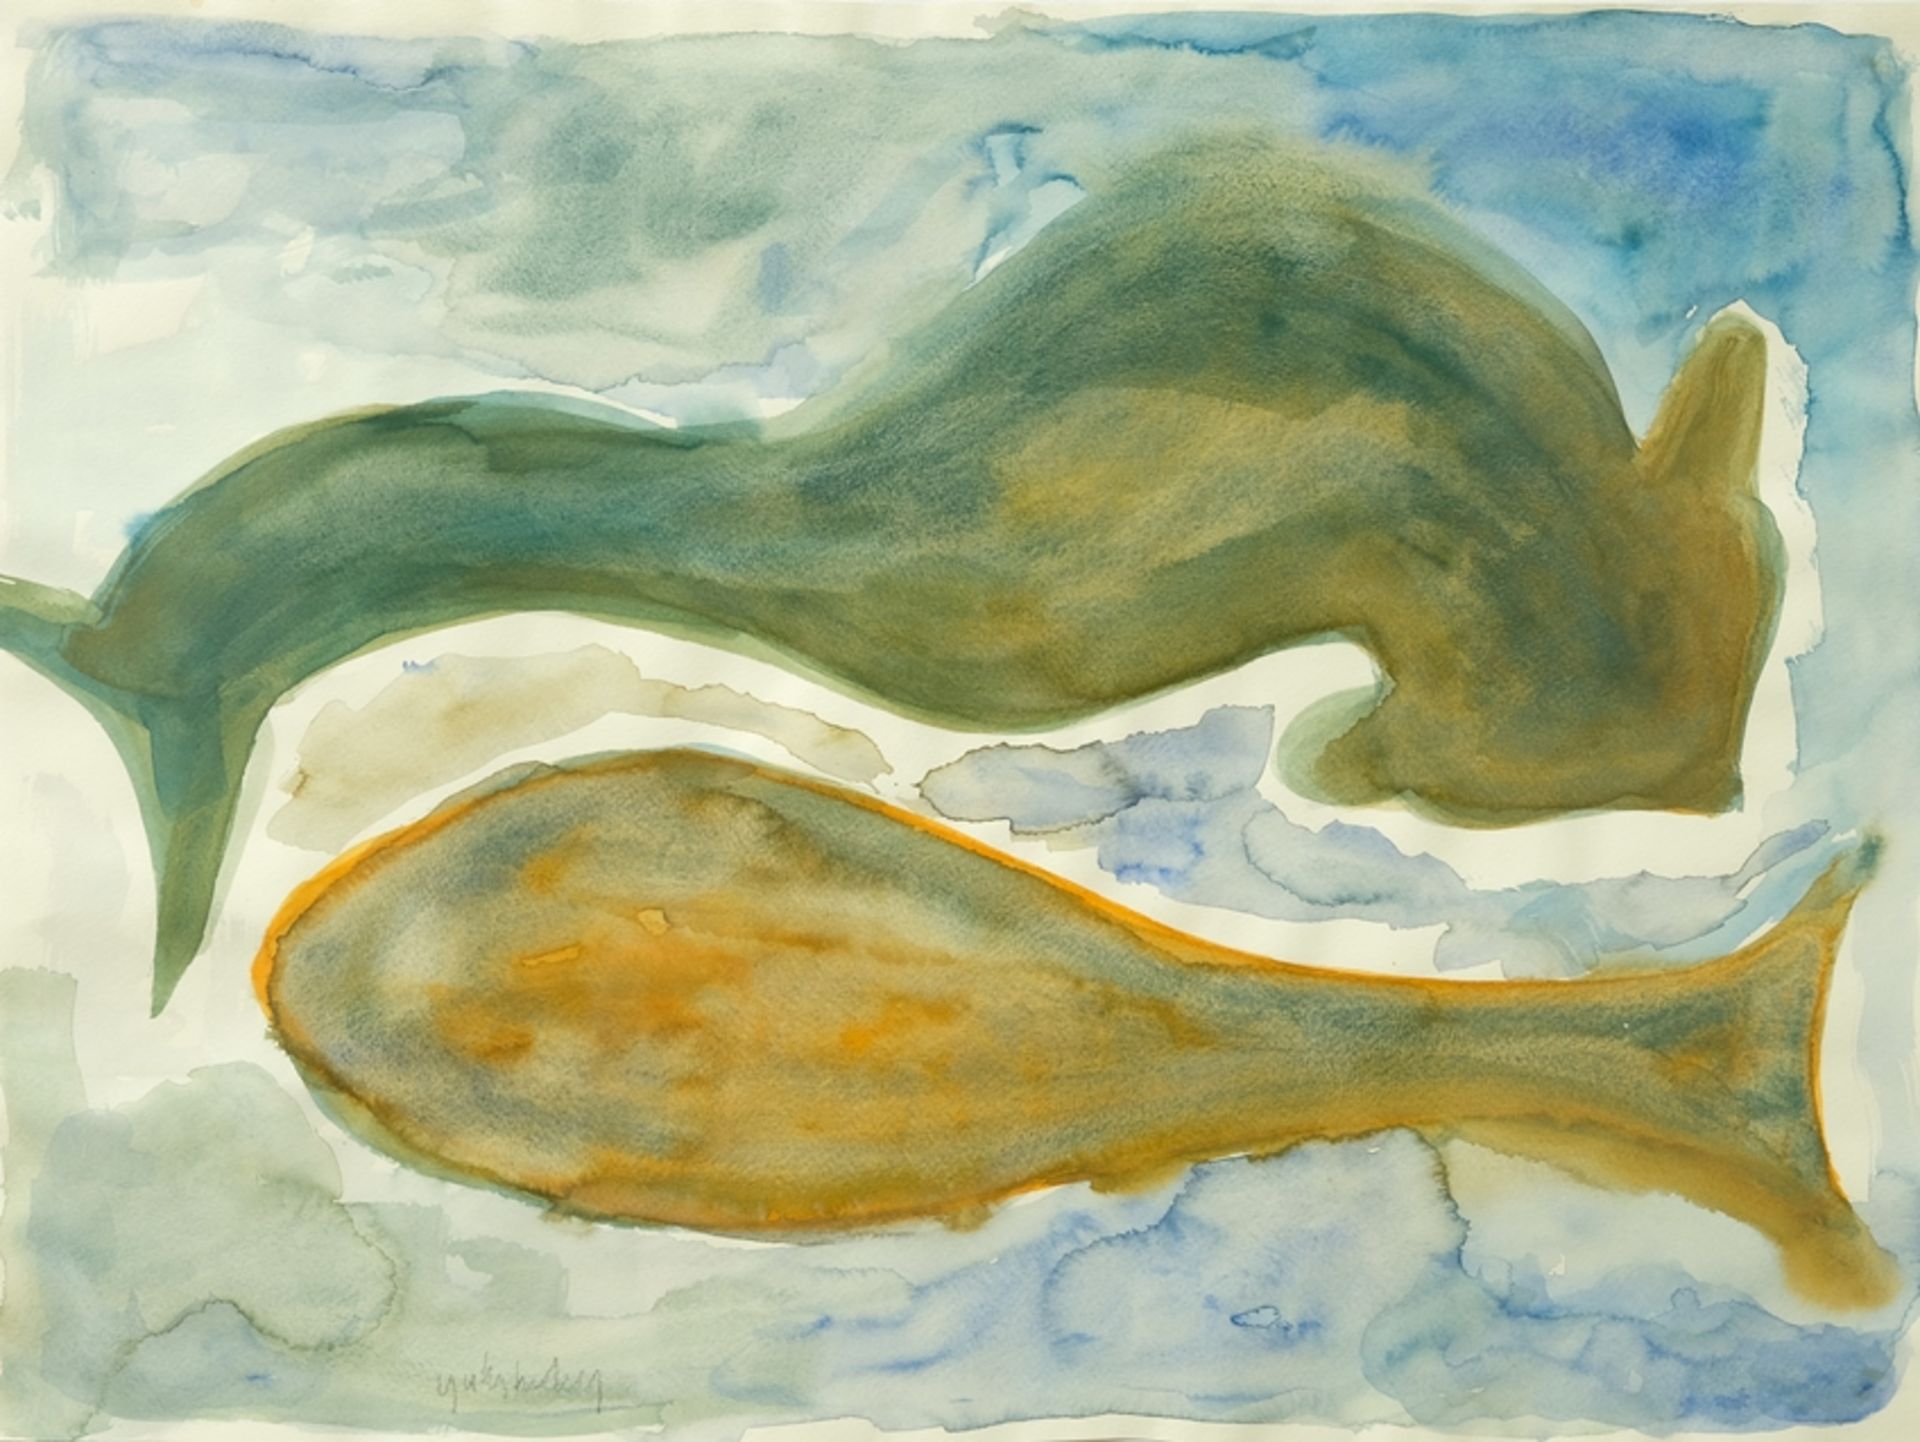 Grieshaber, HAP (1909-1981) Whales, no year, watercolour on paper. 